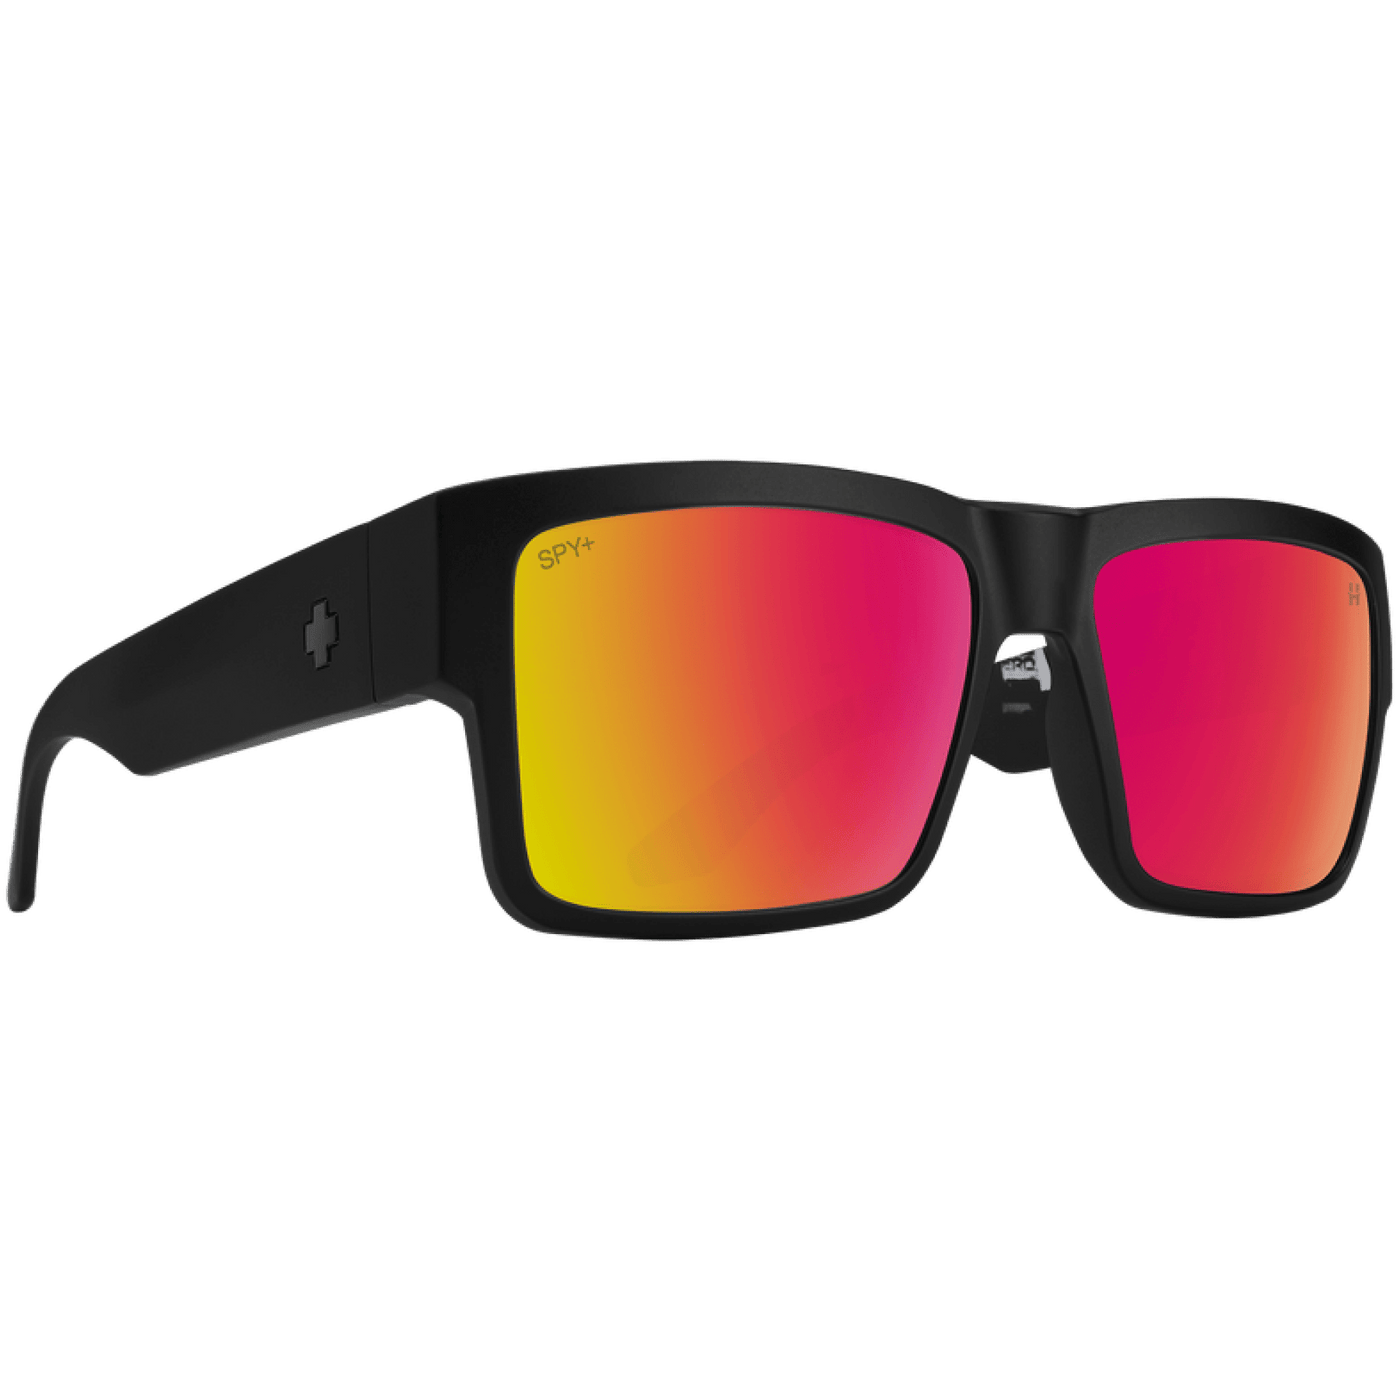 SPY CYRUS Sunglasses, Happy Lens - Pink 8Lines Shop - Fast Shipping